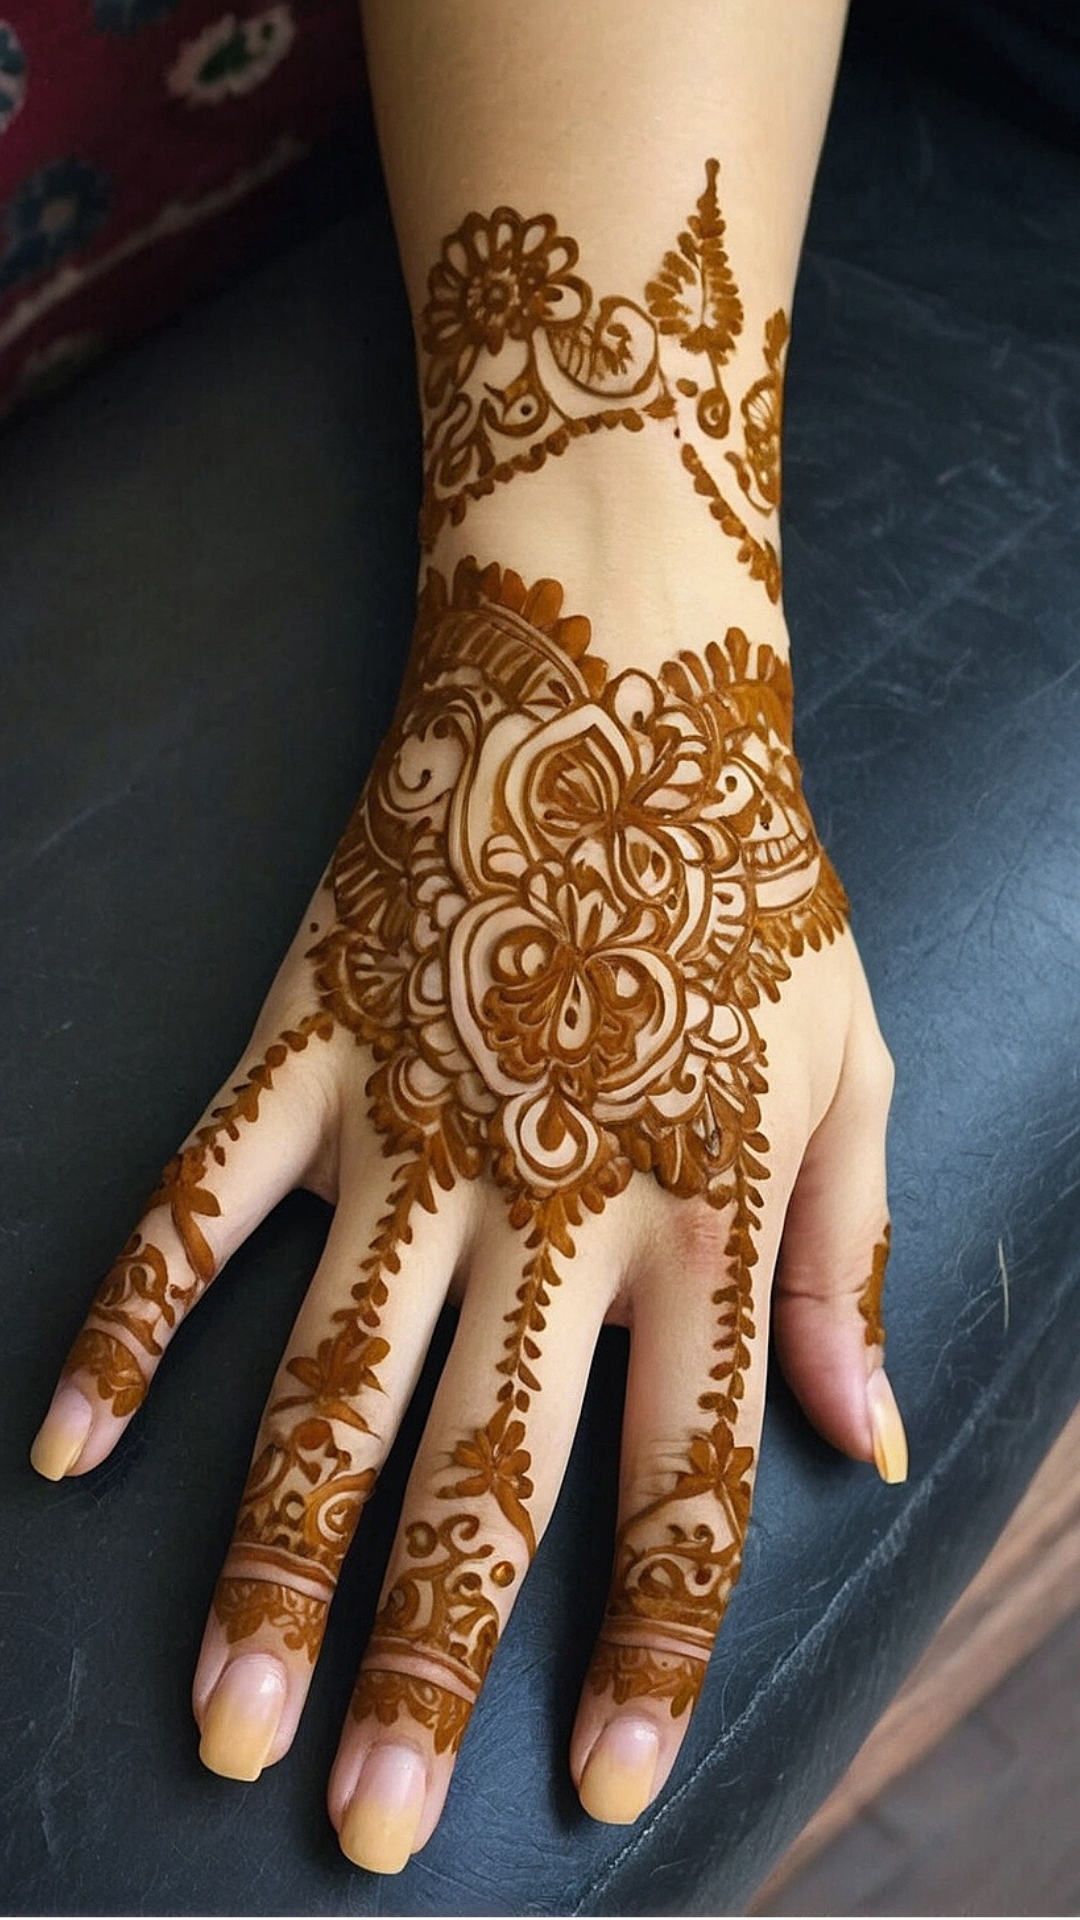 Sizzling Summer Henna: Featuring Lotus and Paisley Patterns